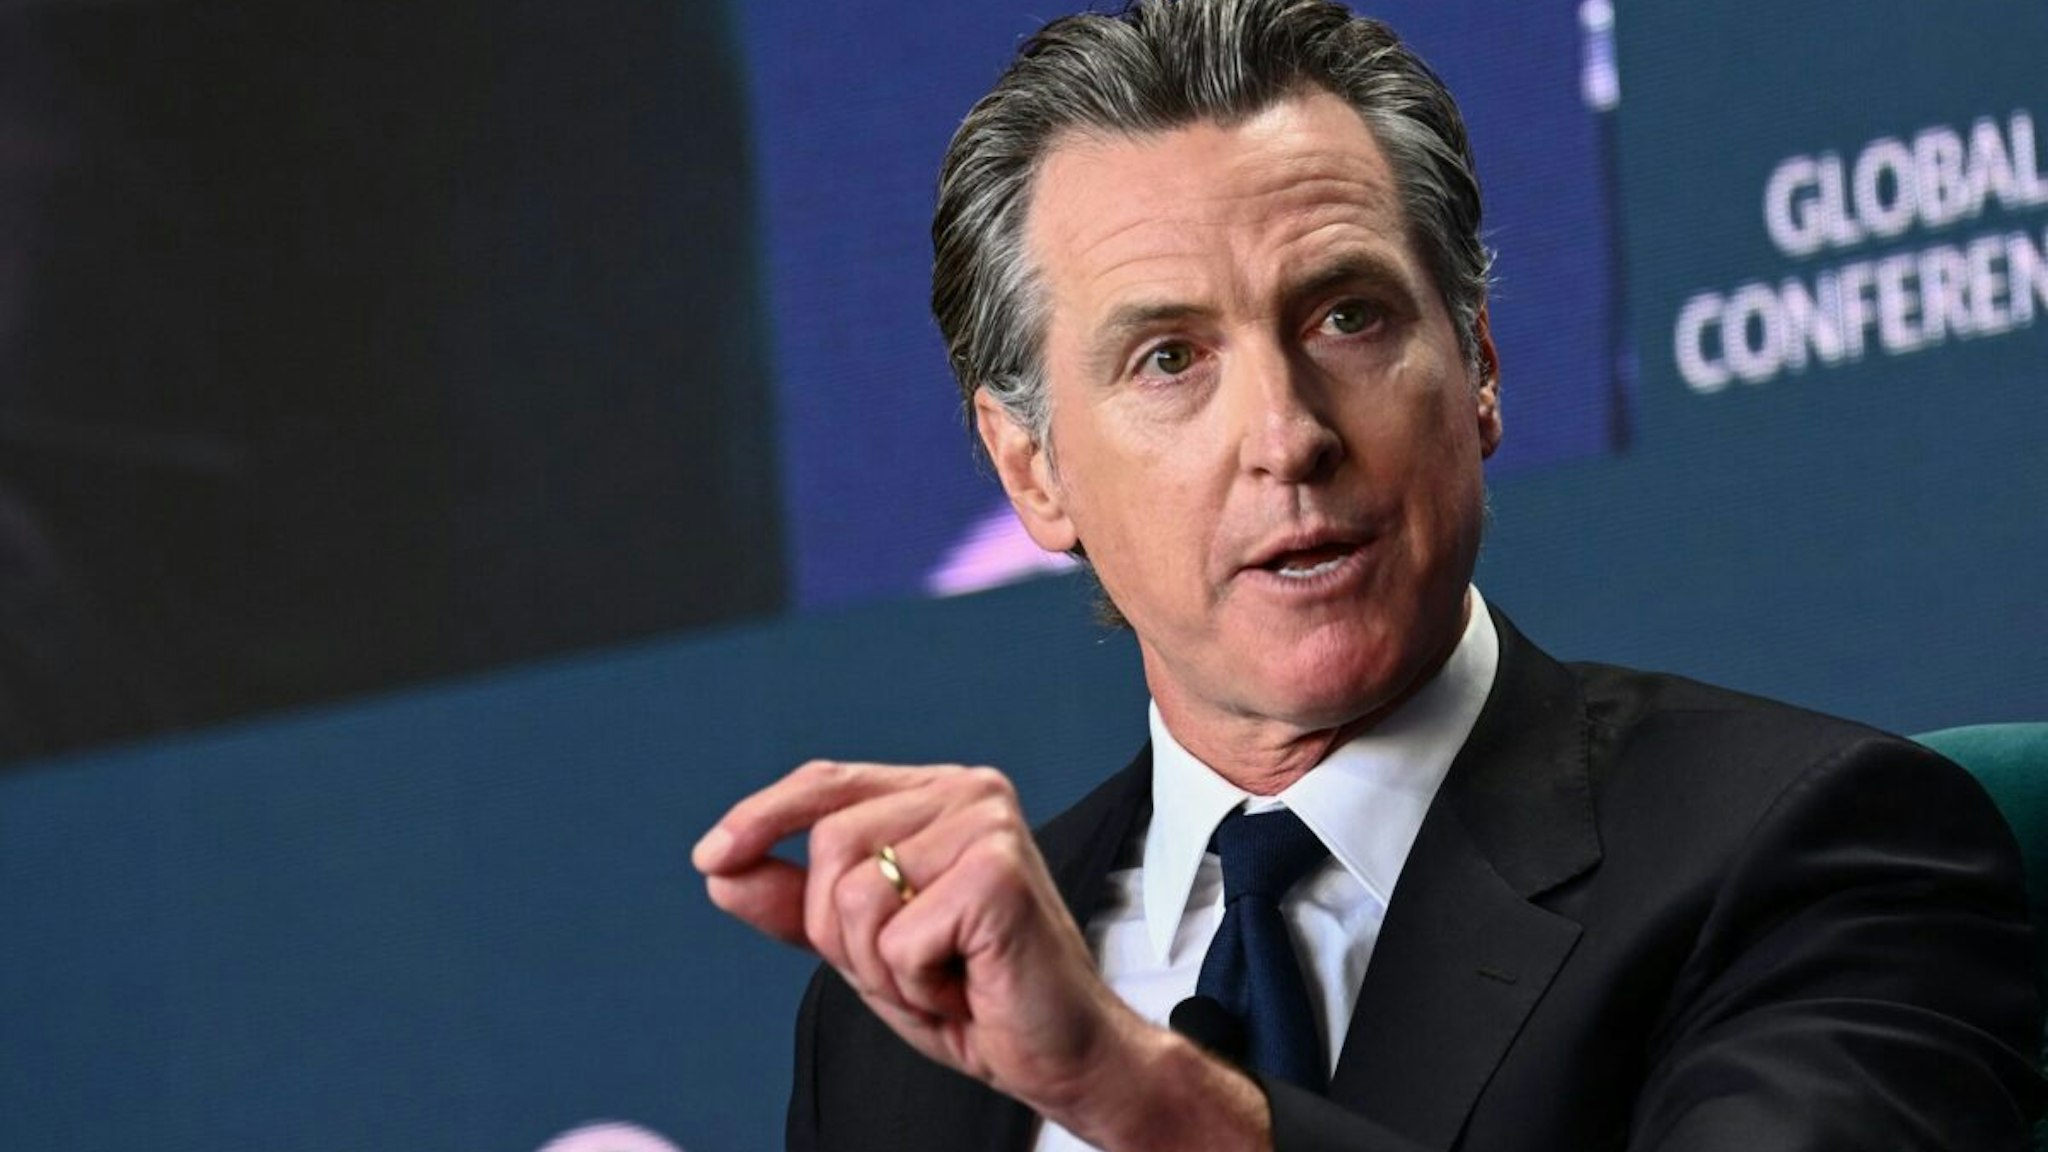 California Governor Gavin Newsom speaks during the Milken Institute Global Conference in Beverly Hills, California on May 2, 2023.